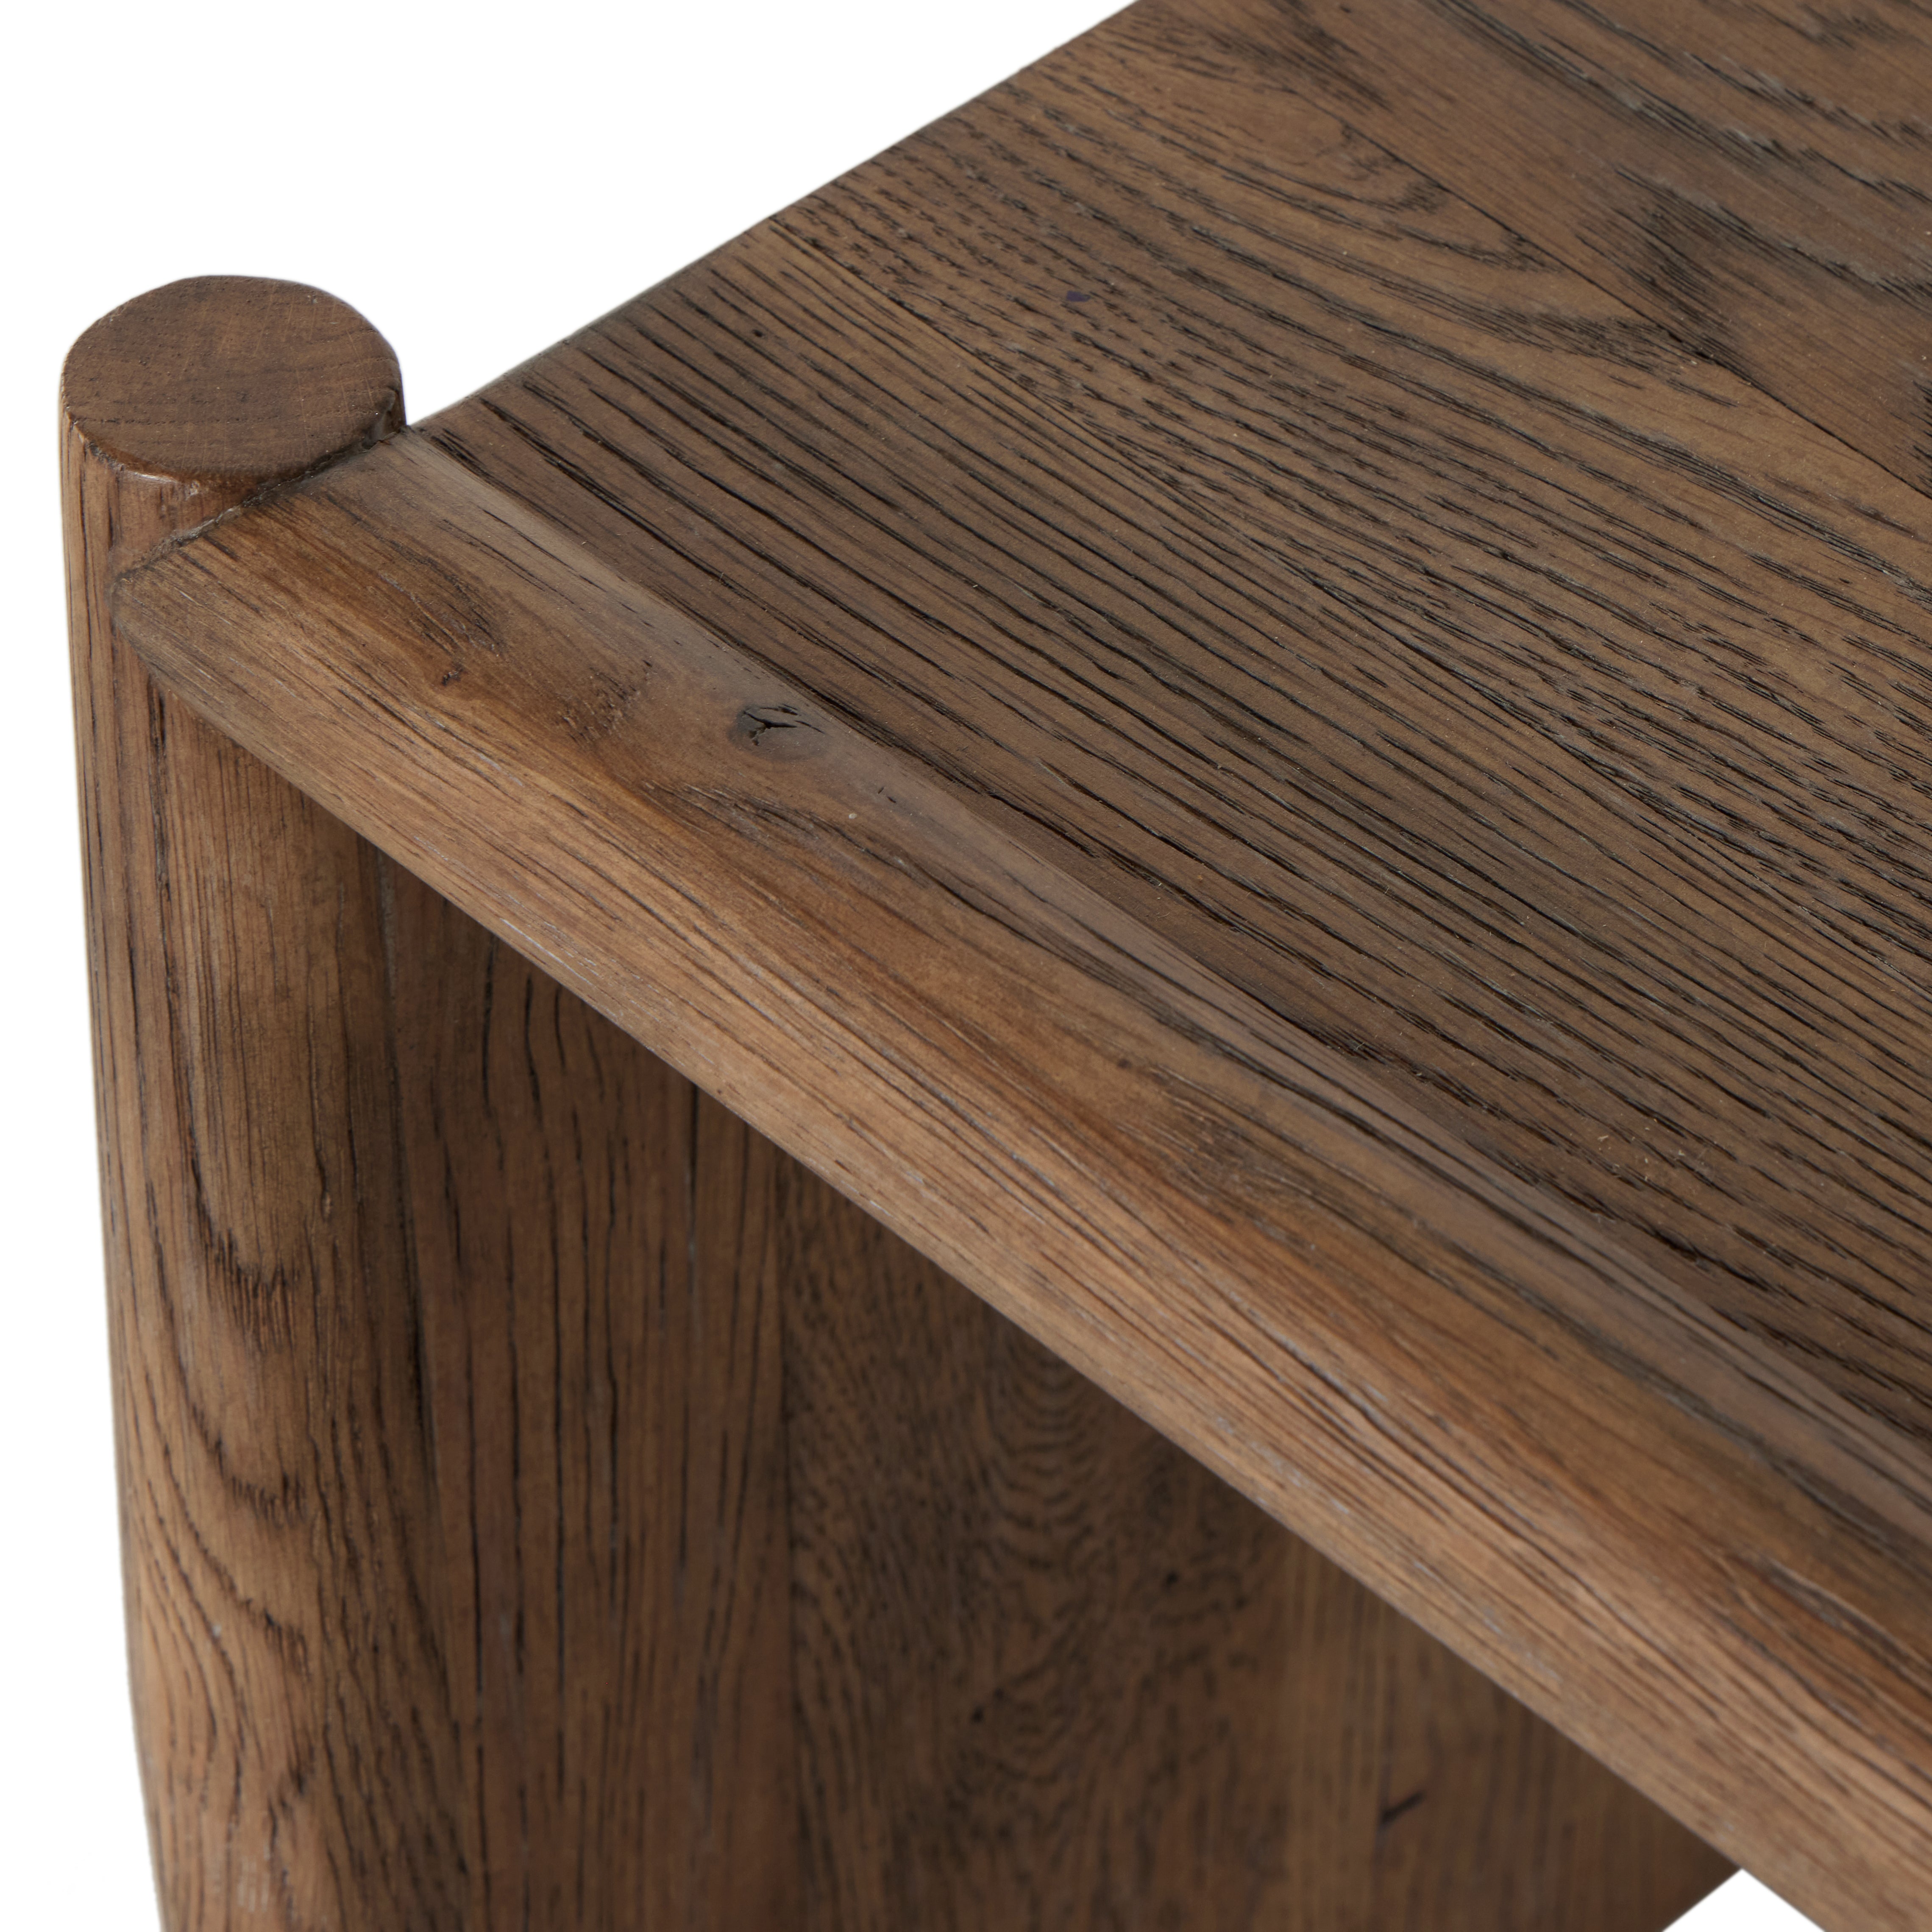 Glenview Coffee Table-Weathered Oak - StyleMeGHD - 